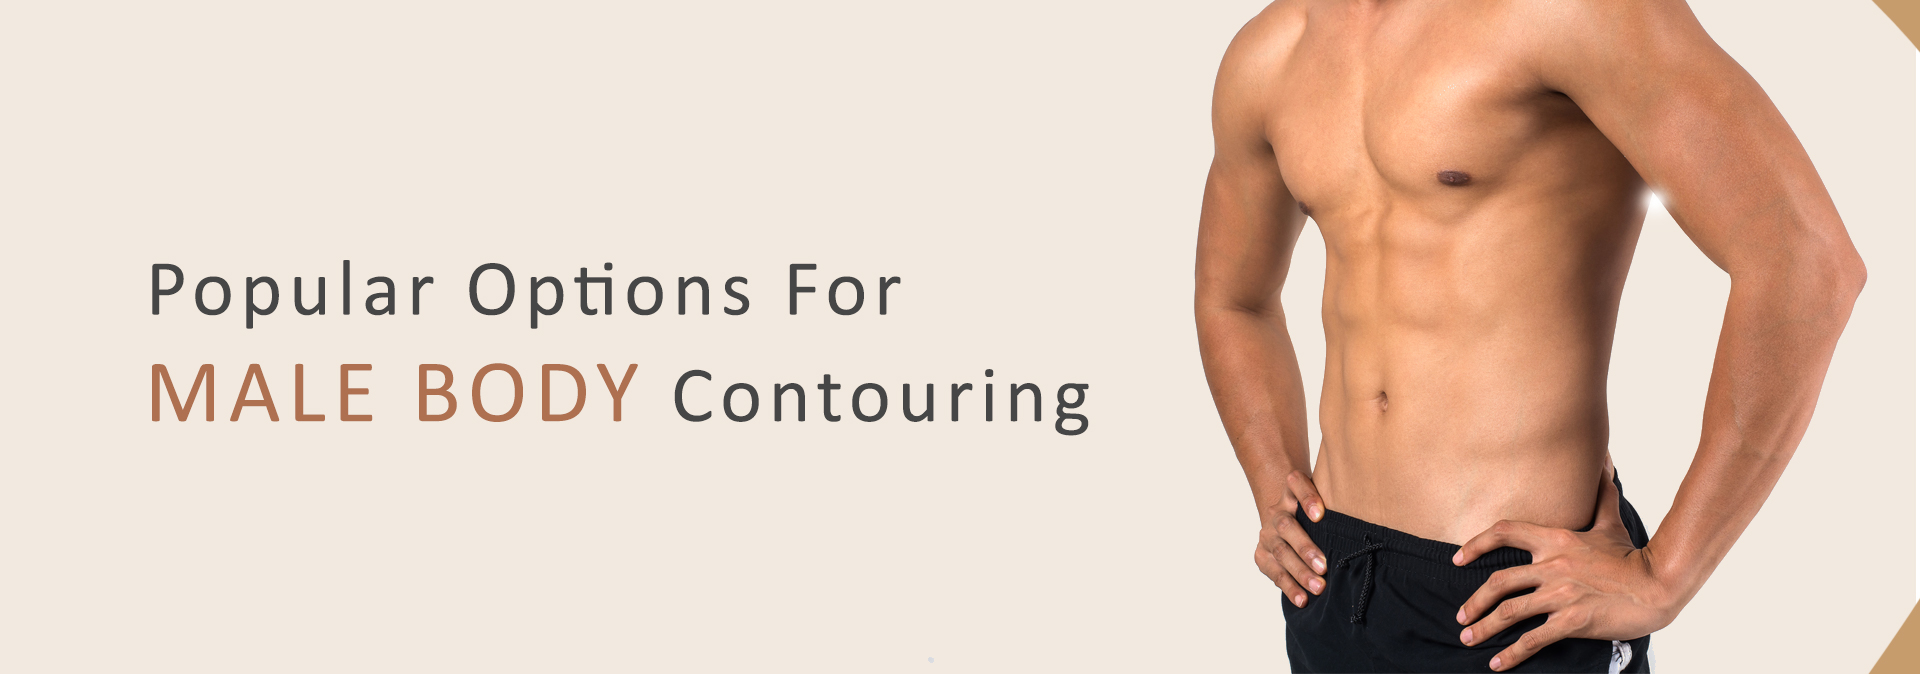 Popular options for Male body contouring